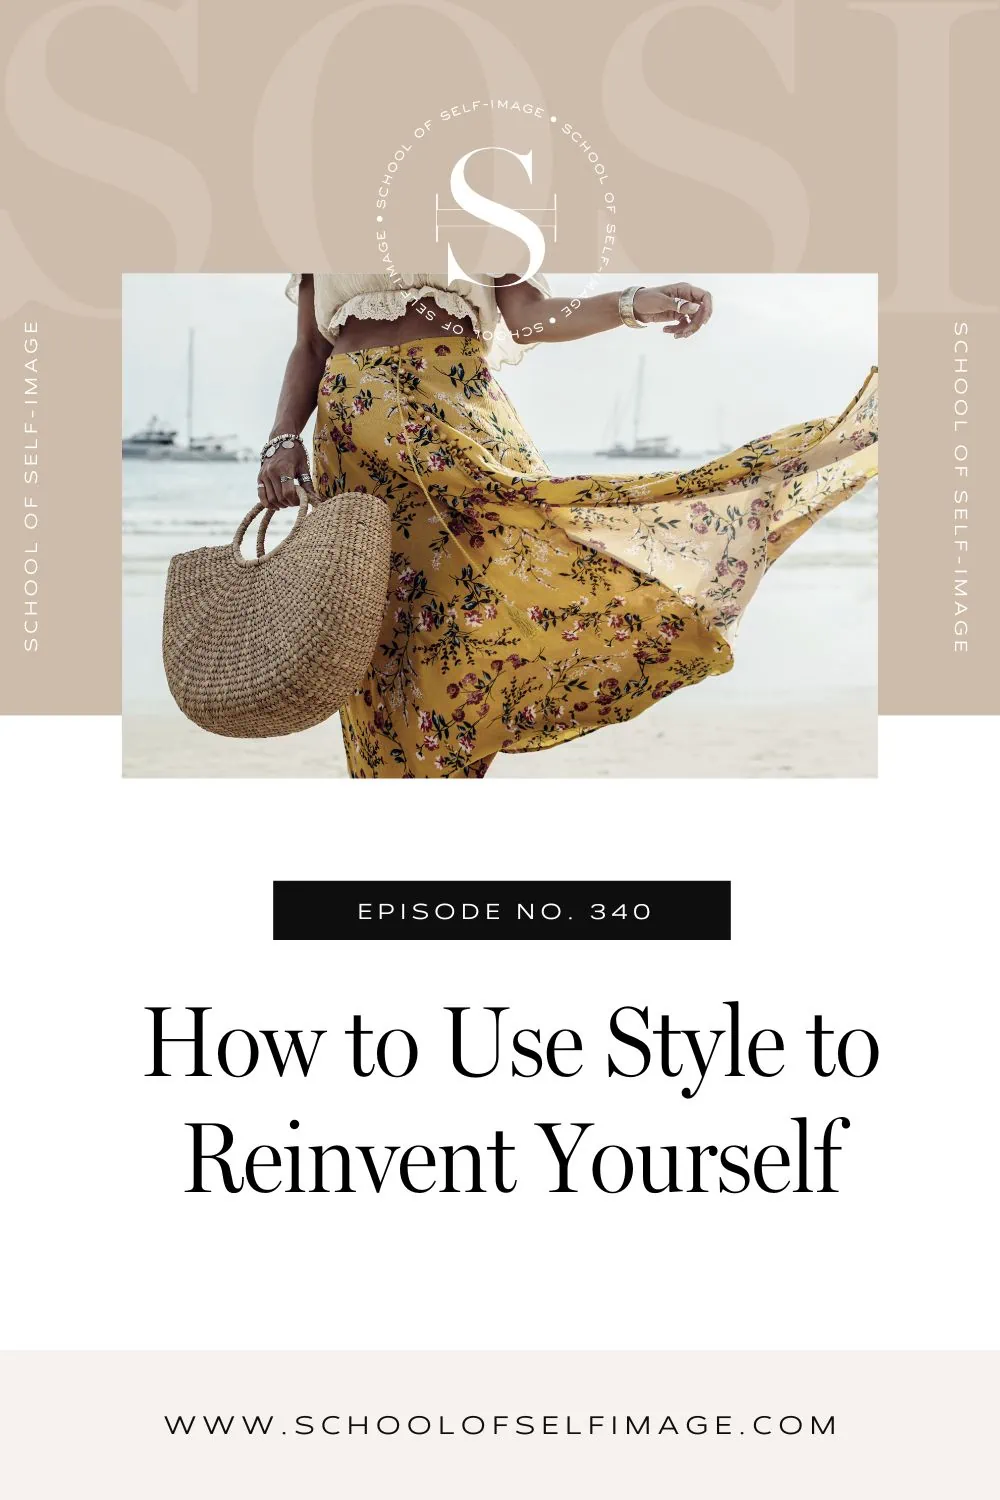 How to Use Style to Reinvent Yourself